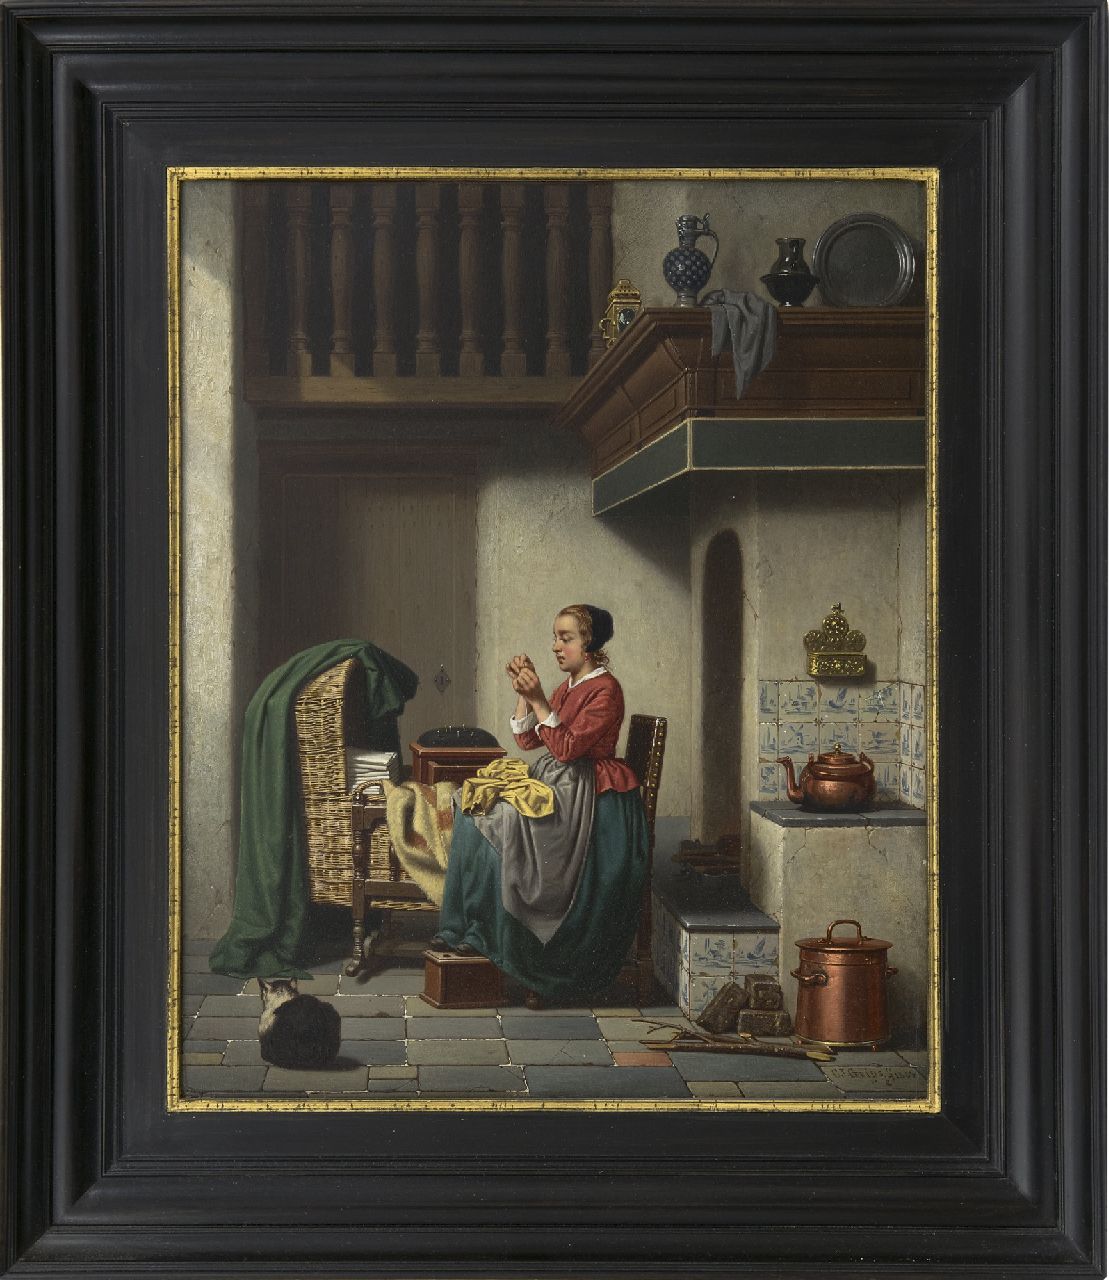 Grips C.J.  | Carel Jozeph Grips, Mending the garments, oil on panel 36.0 x 29.3 cm, signed l.r. and dated 1864